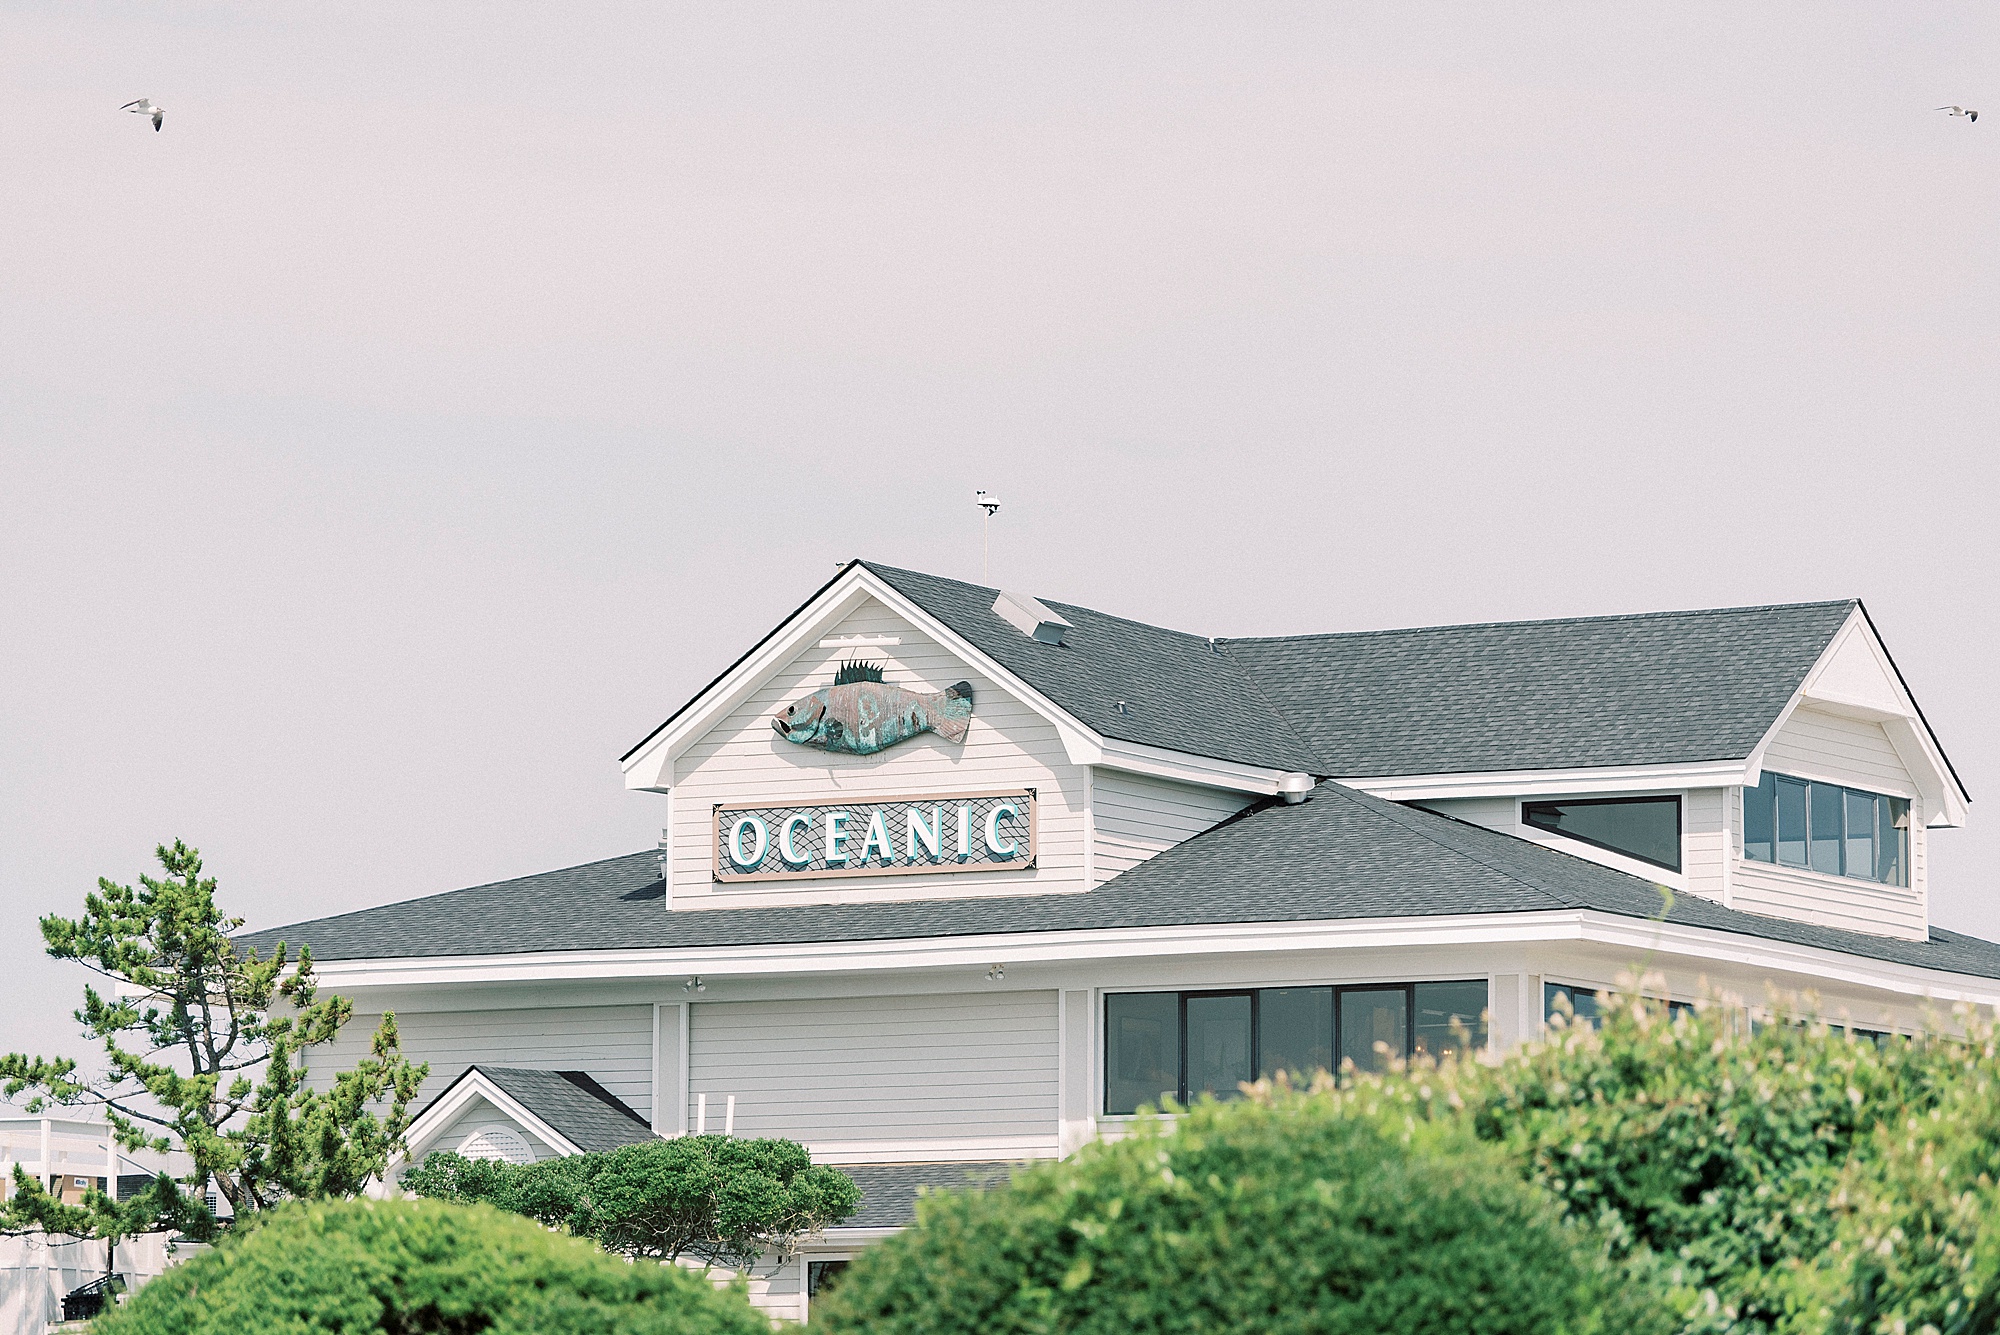 Oceanic Restaurant wedding day photographed by Kevyn Dixon Photography